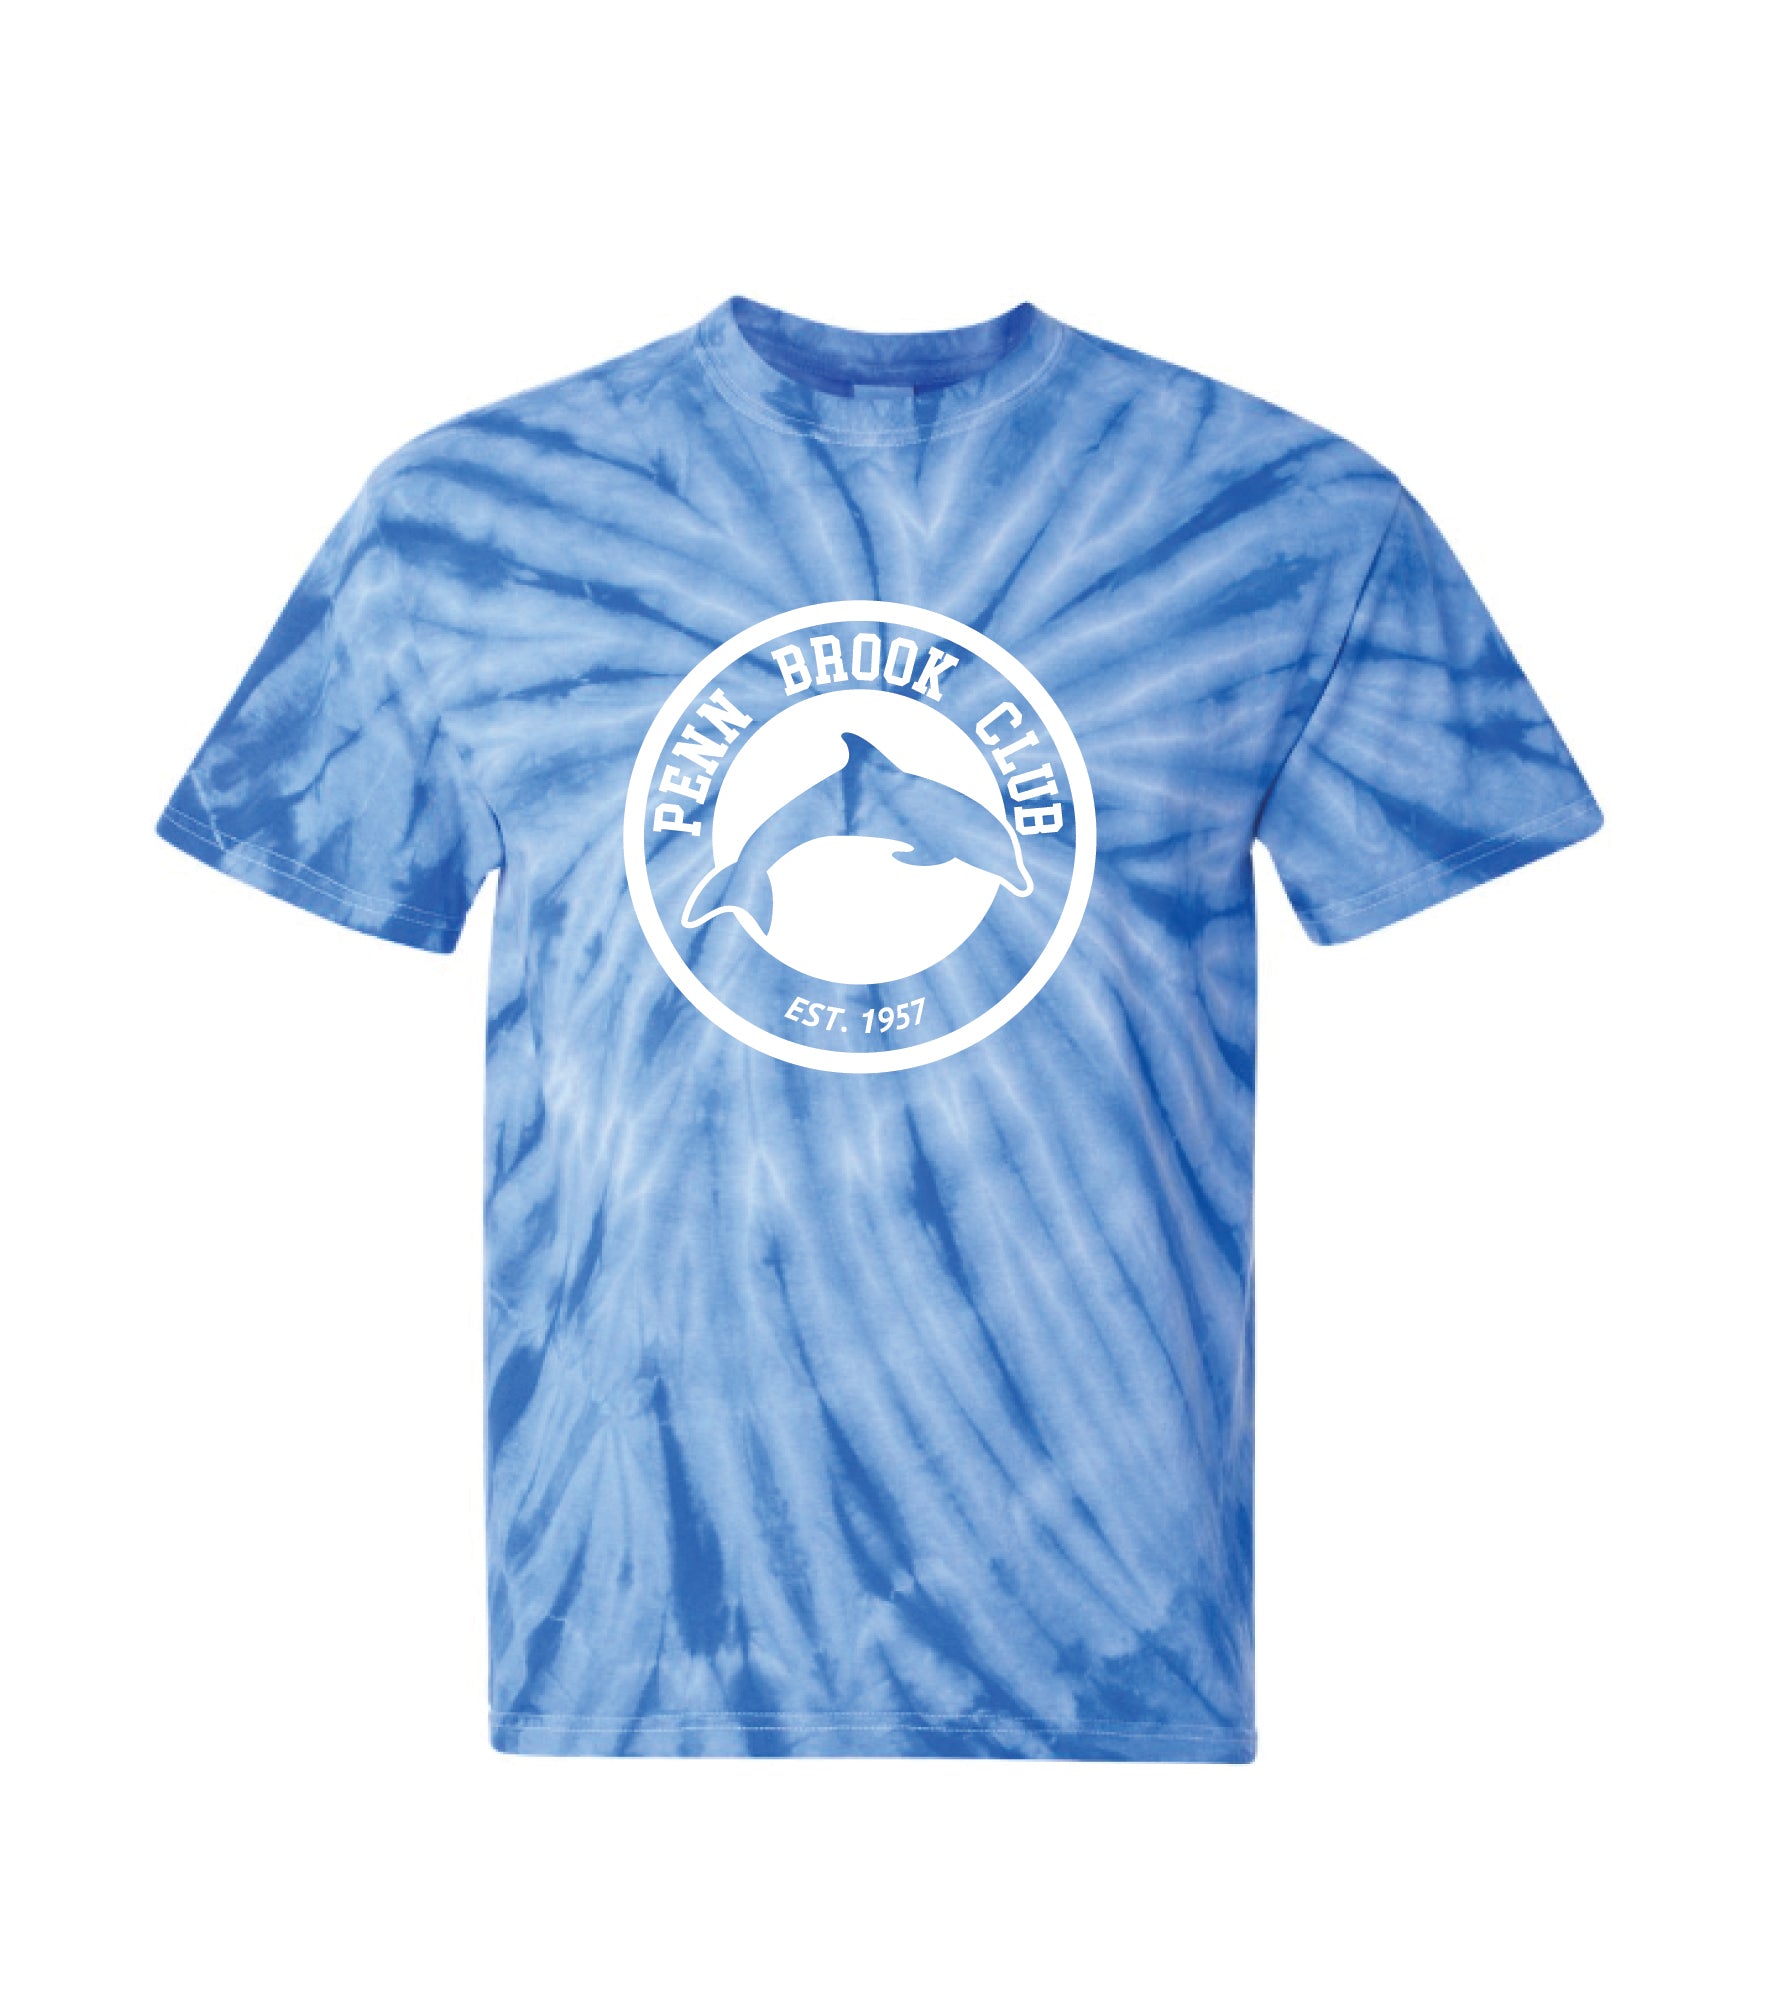 Penn Brook Blue Tie-Dye T-Shirt - Adult and Youth